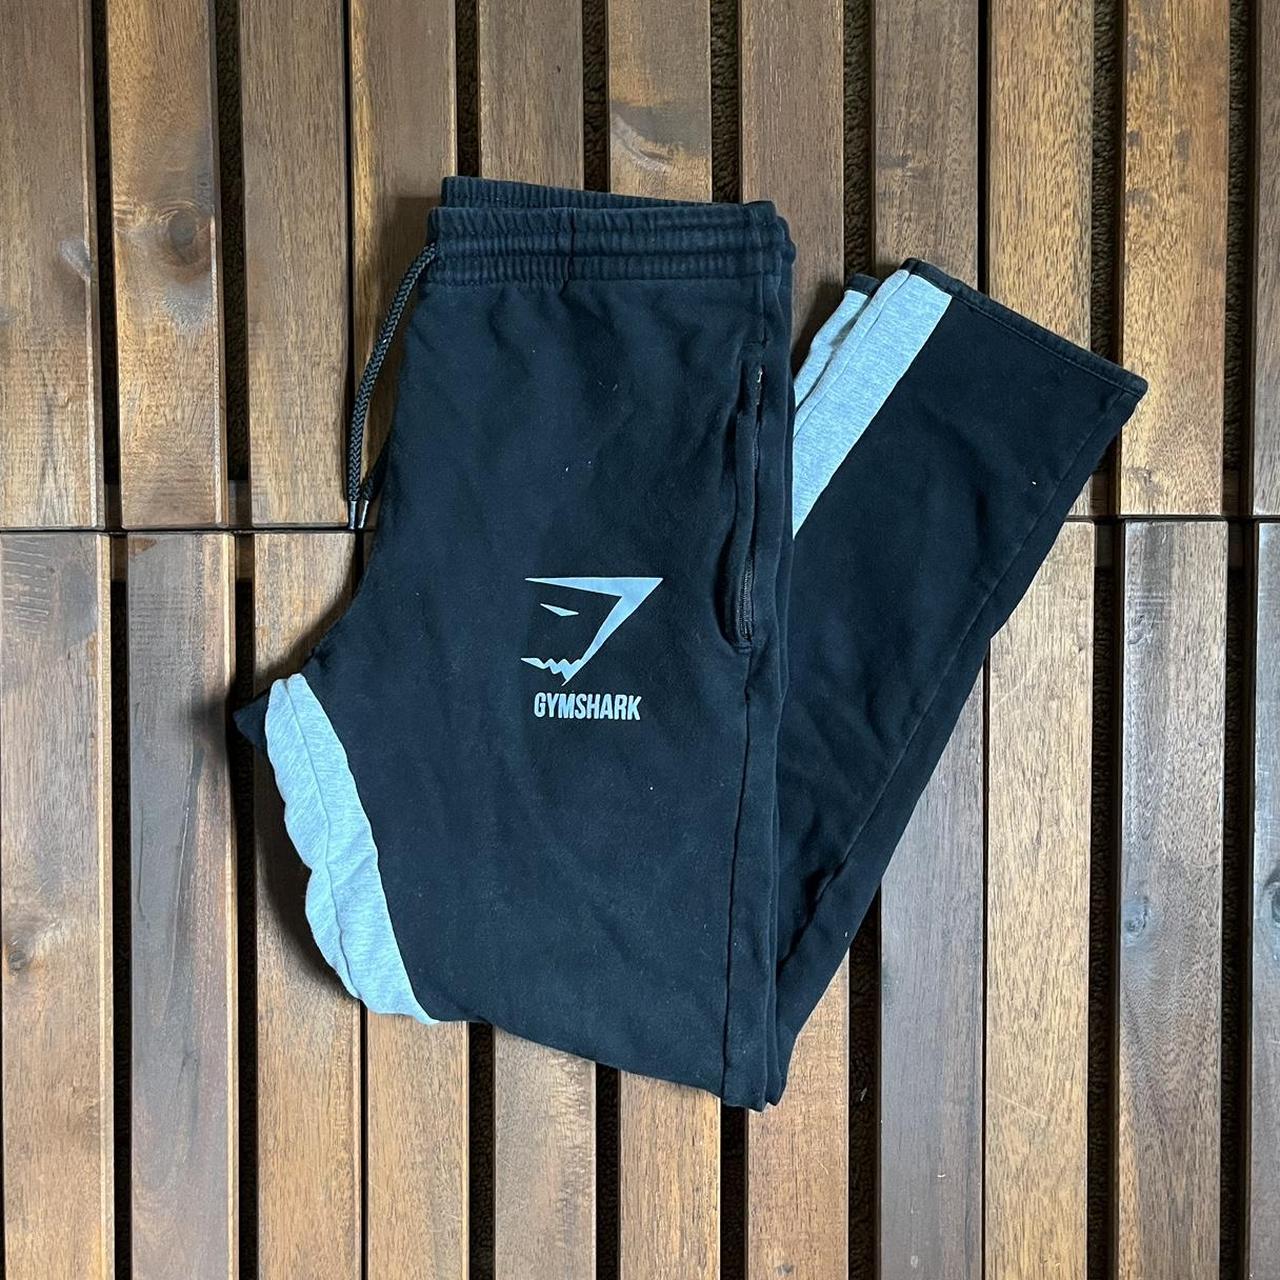 Gymshark Sweatpants Size M (fit more as a small - Depop